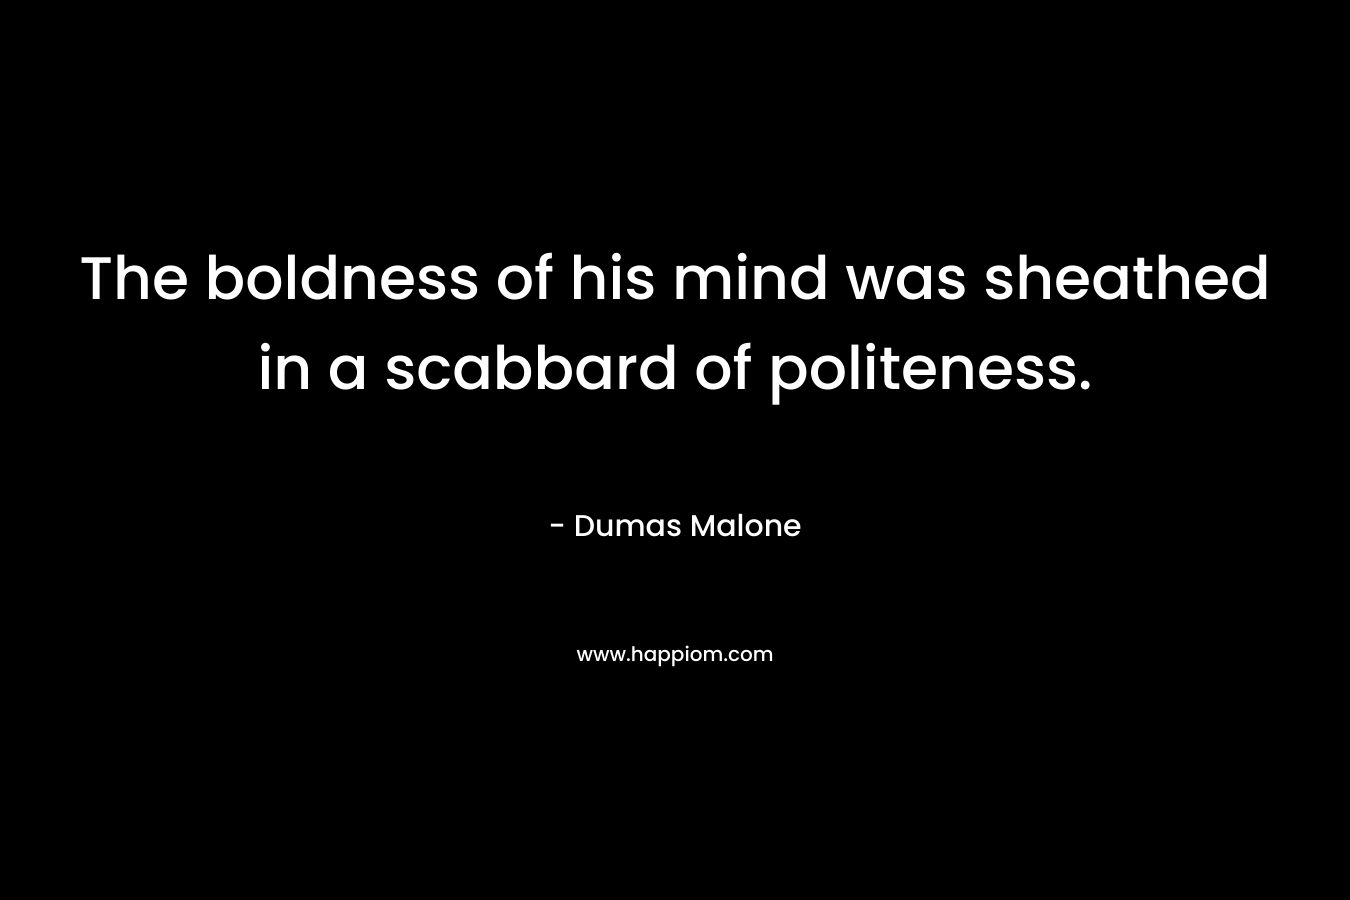 The boldness of his mind was sheathed in a scabbard of politeness.